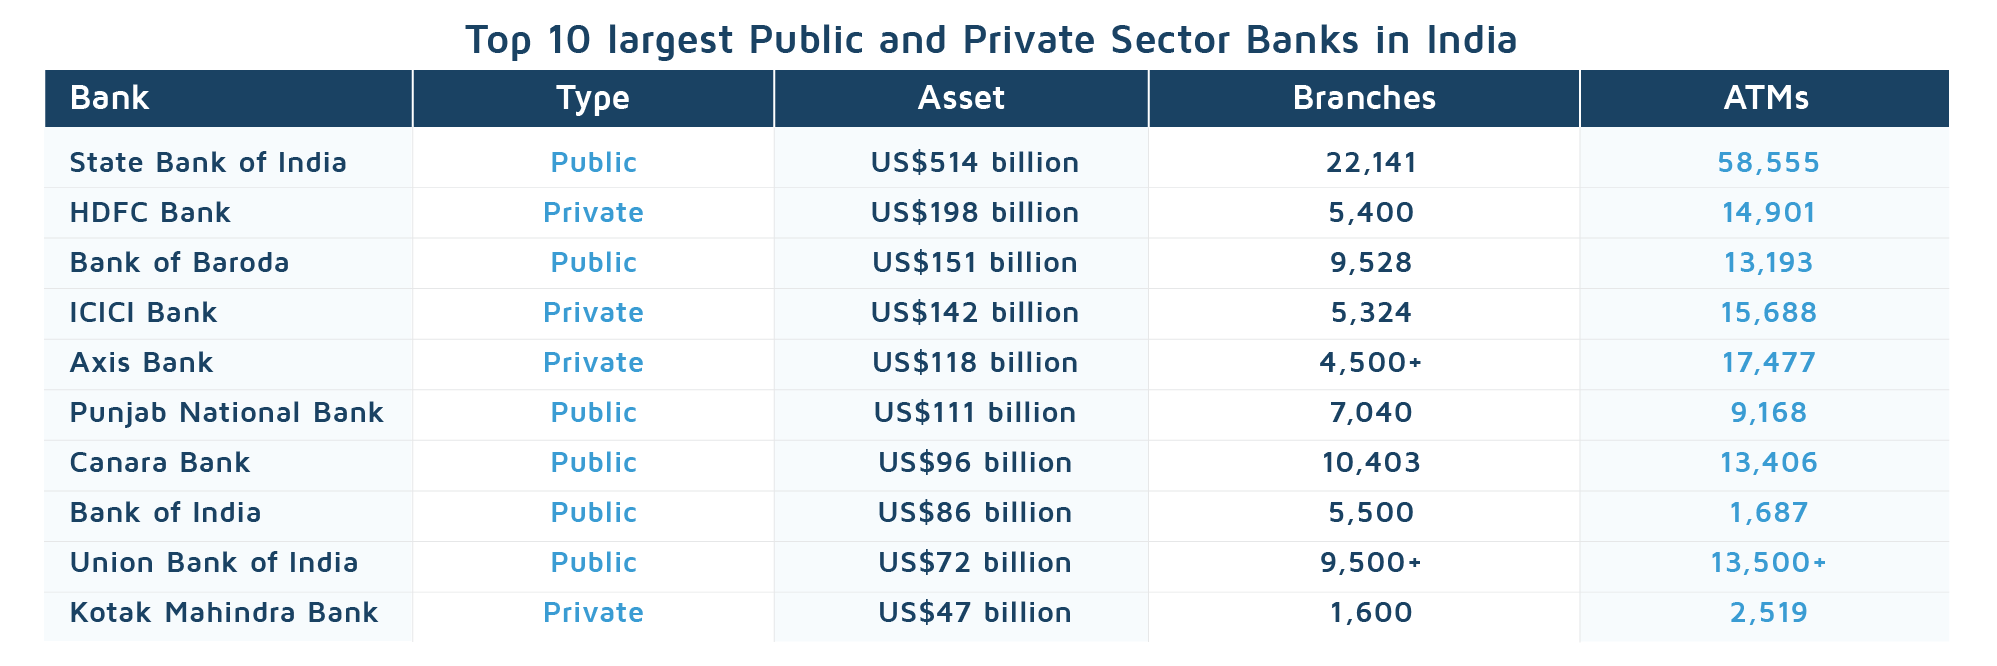 Top 10 Public and Private Banks DevelopmentAid